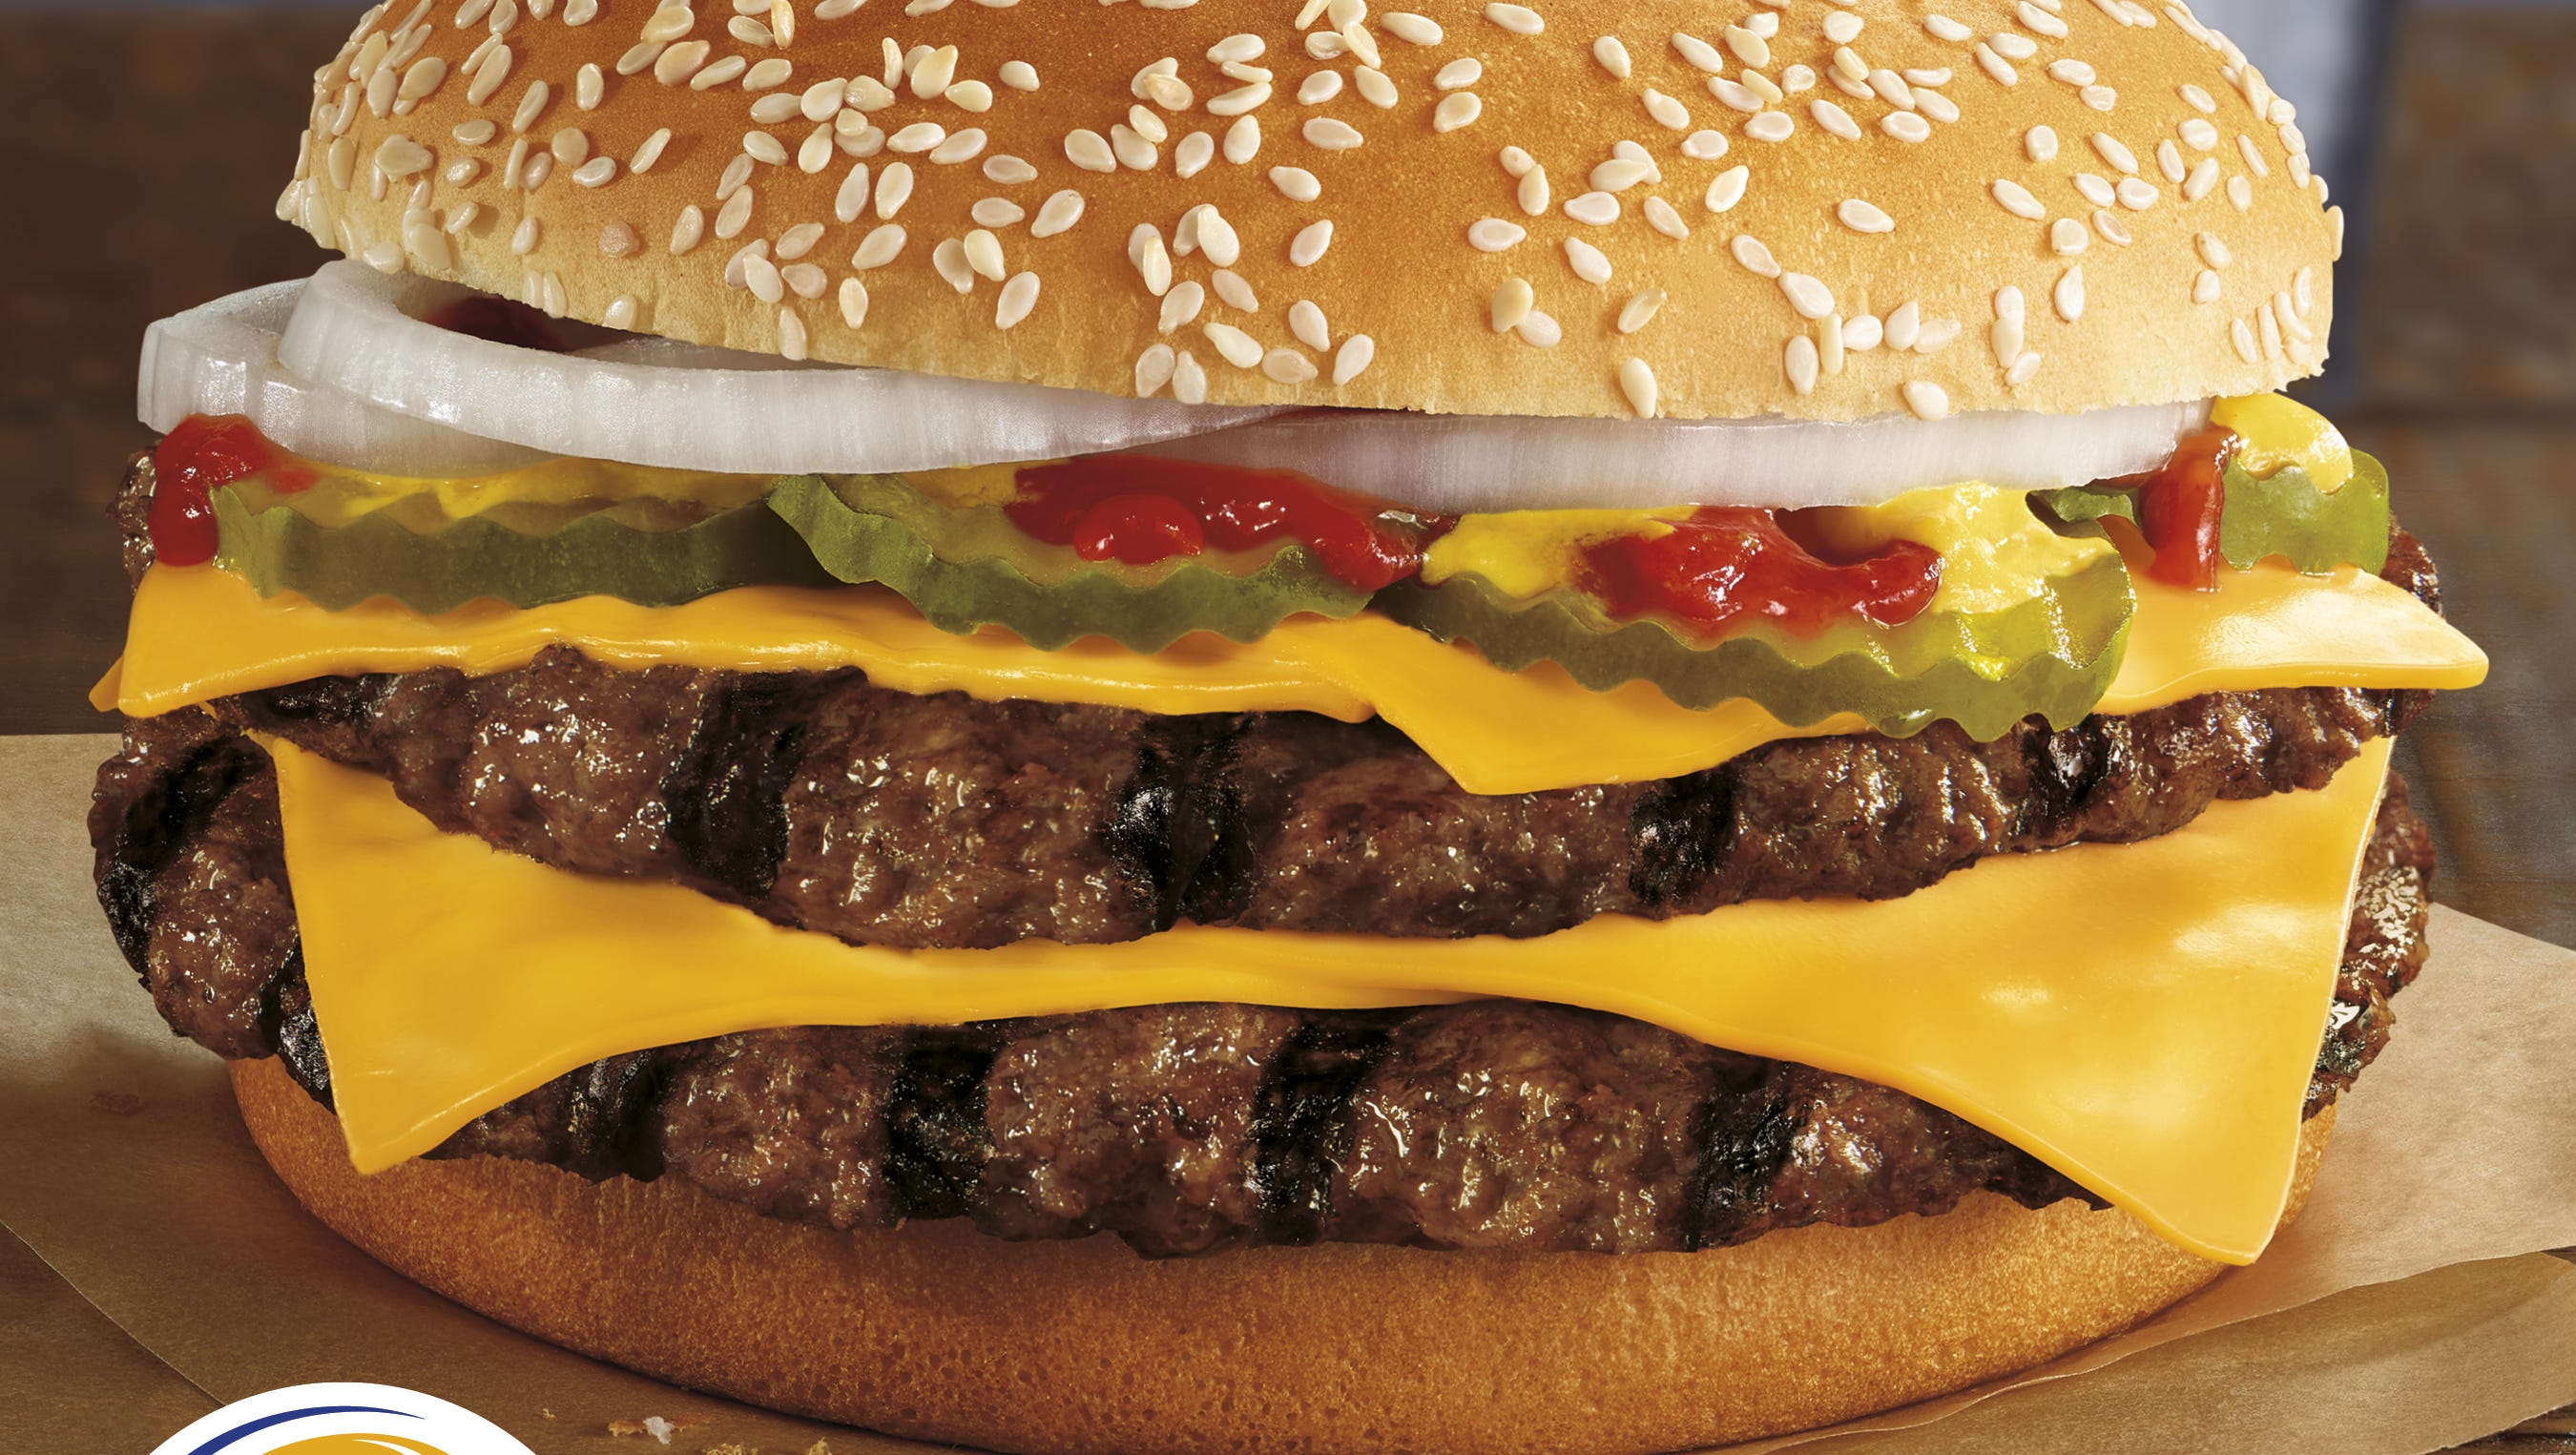 Burger King Launches New Double Quarter Pound Burger Today